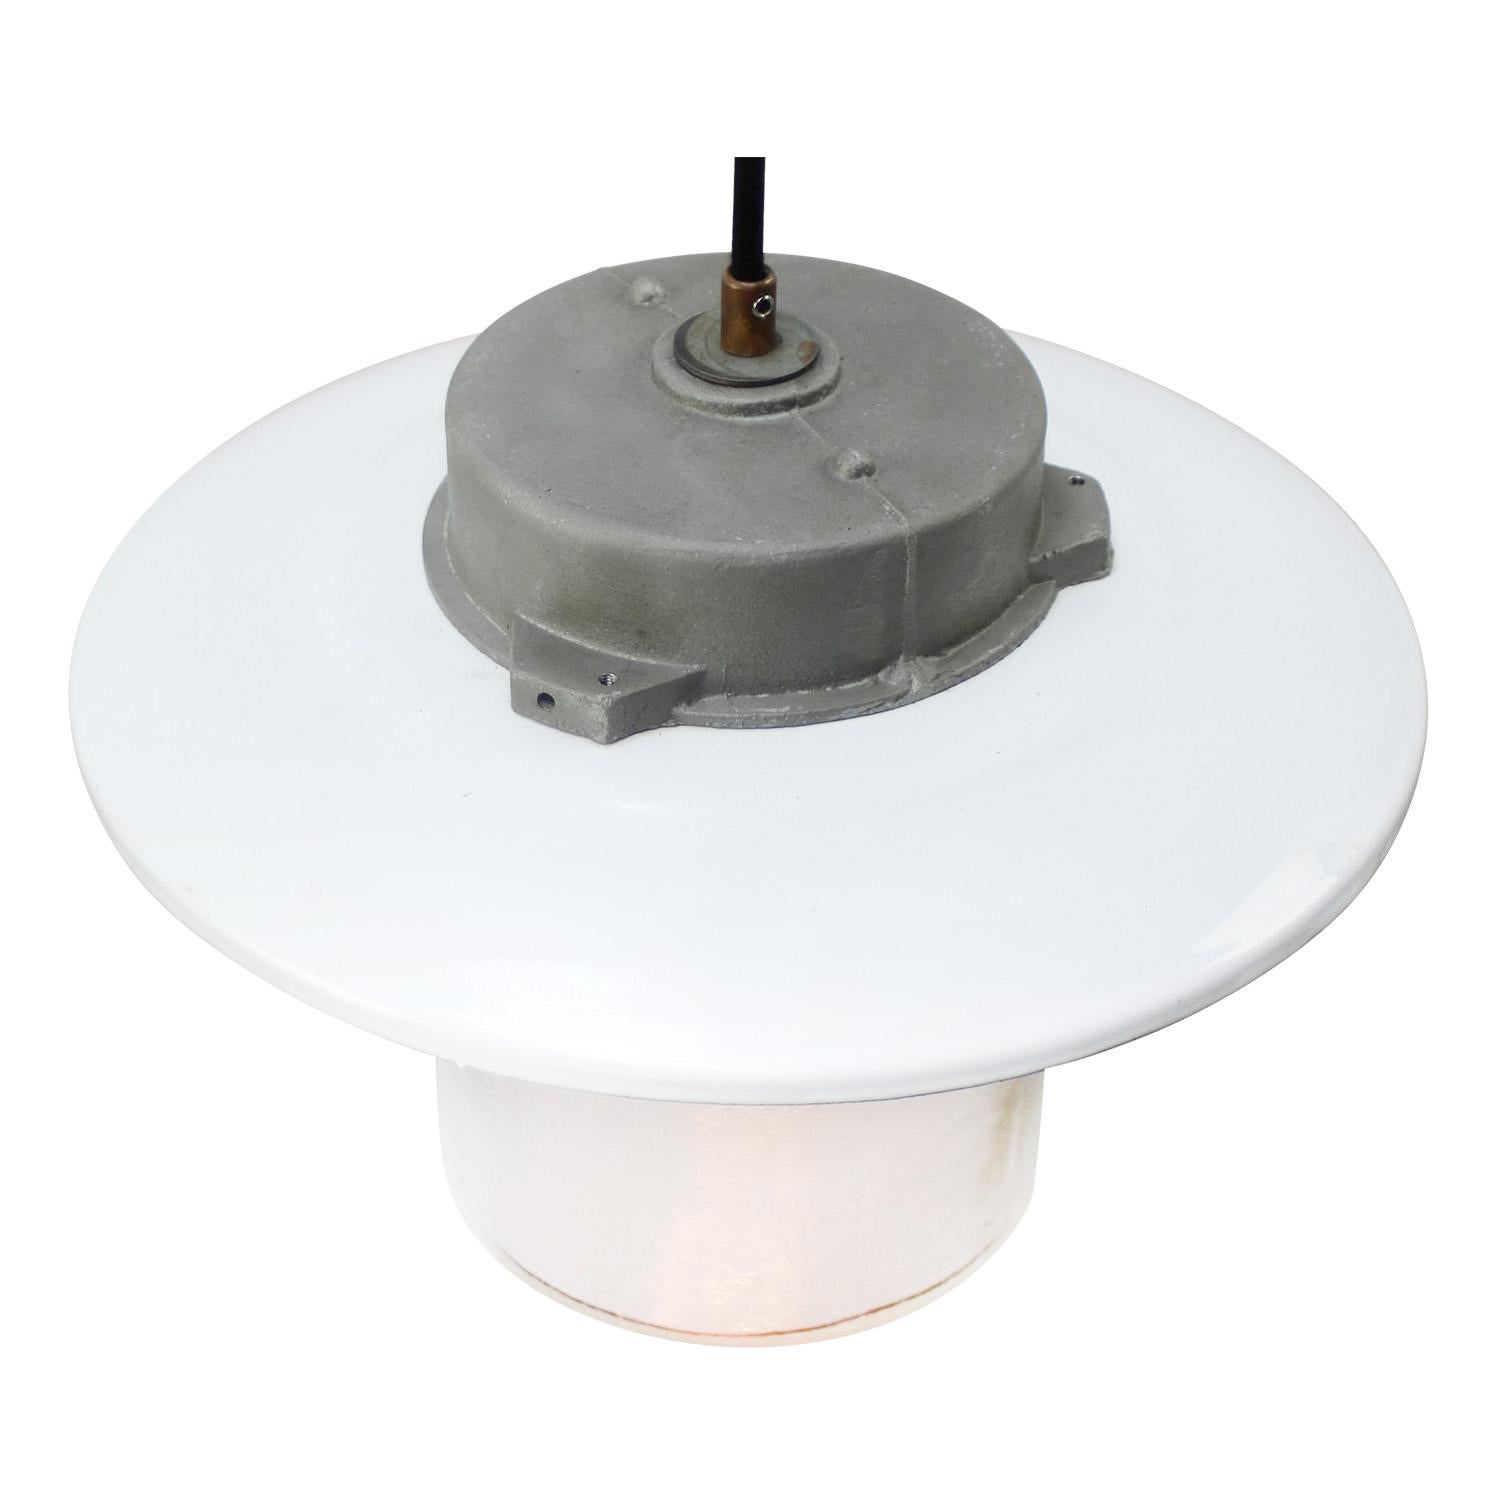 White enamel Industrial hanging lamp.
Frosted glass with aluminium top.

Weight: 2.00 kg / 4.4 lb

Priced per individual item. All lamps have been made suitable by international standards for incandescent light bulbs, energy-efficient and LED bulbs.